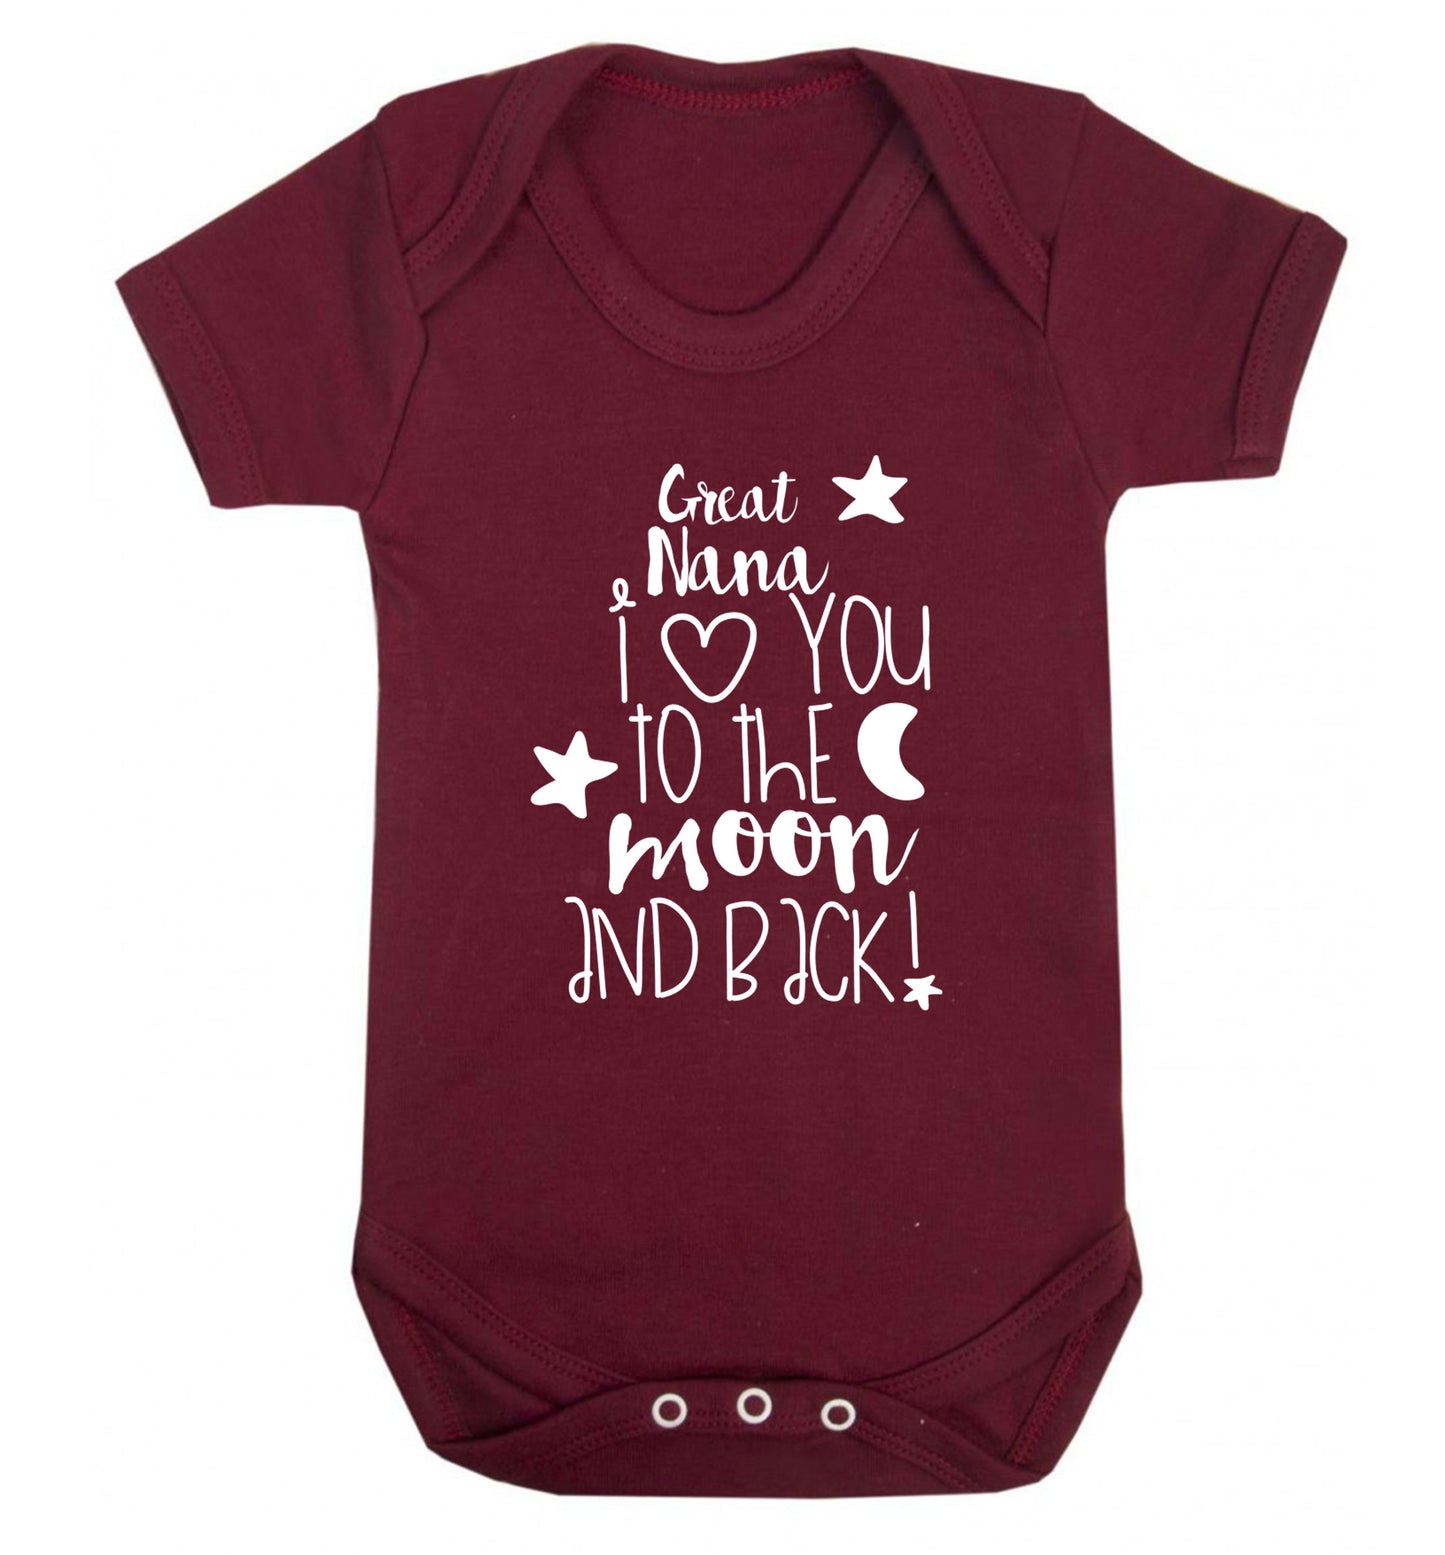 Great Nana I love you to the moon and back Baby Vest maroon 18-24 months